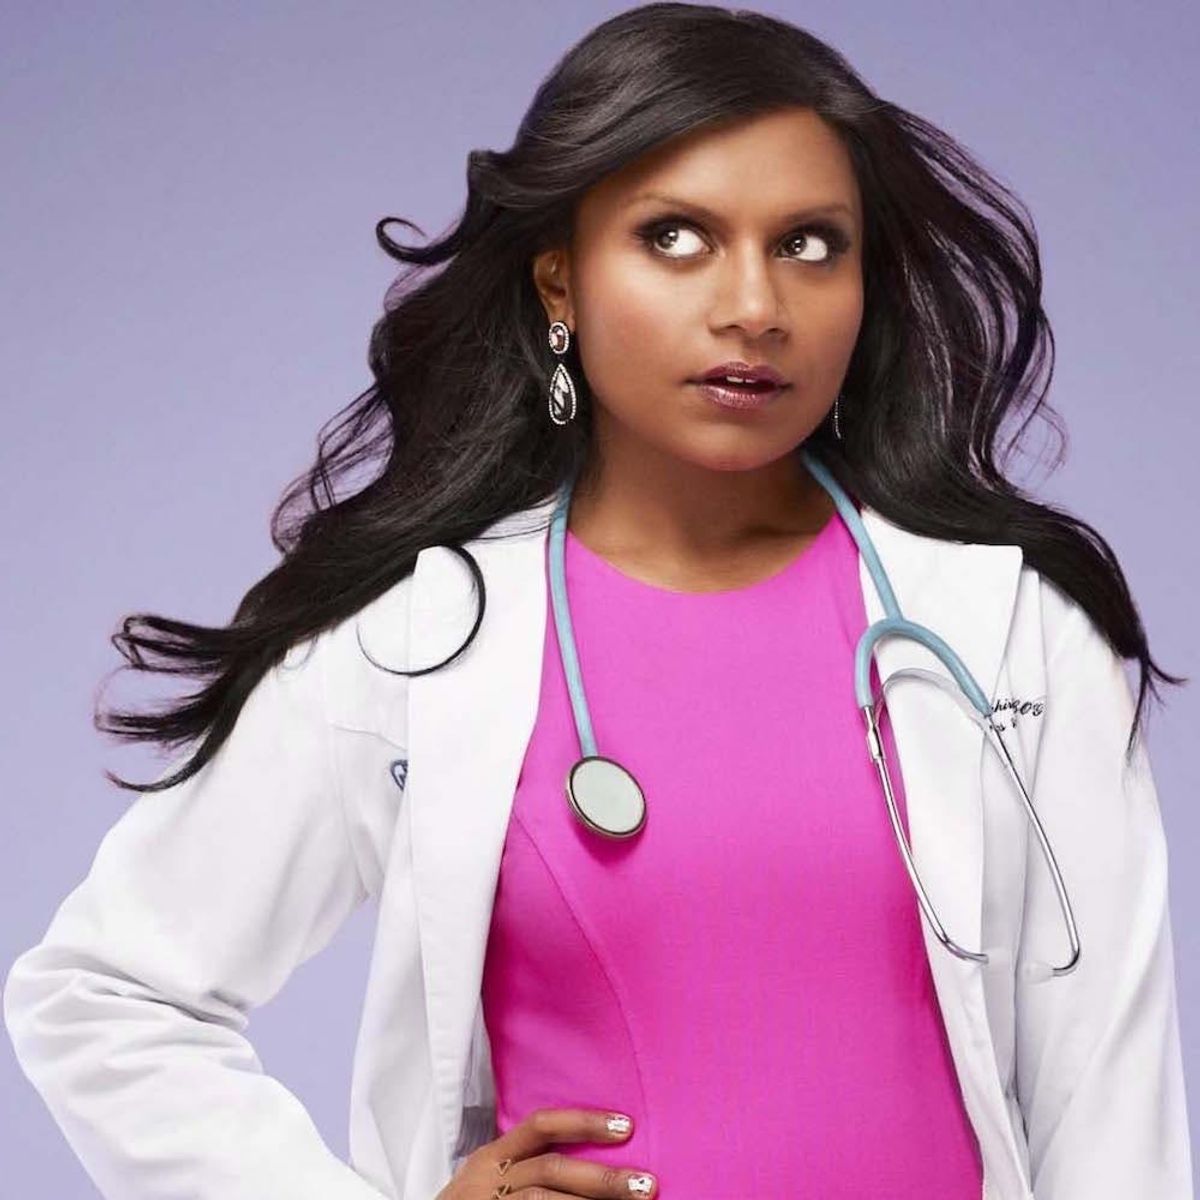 5 Shows to Add to Your Netflix Queue After That Mindy Project Finale